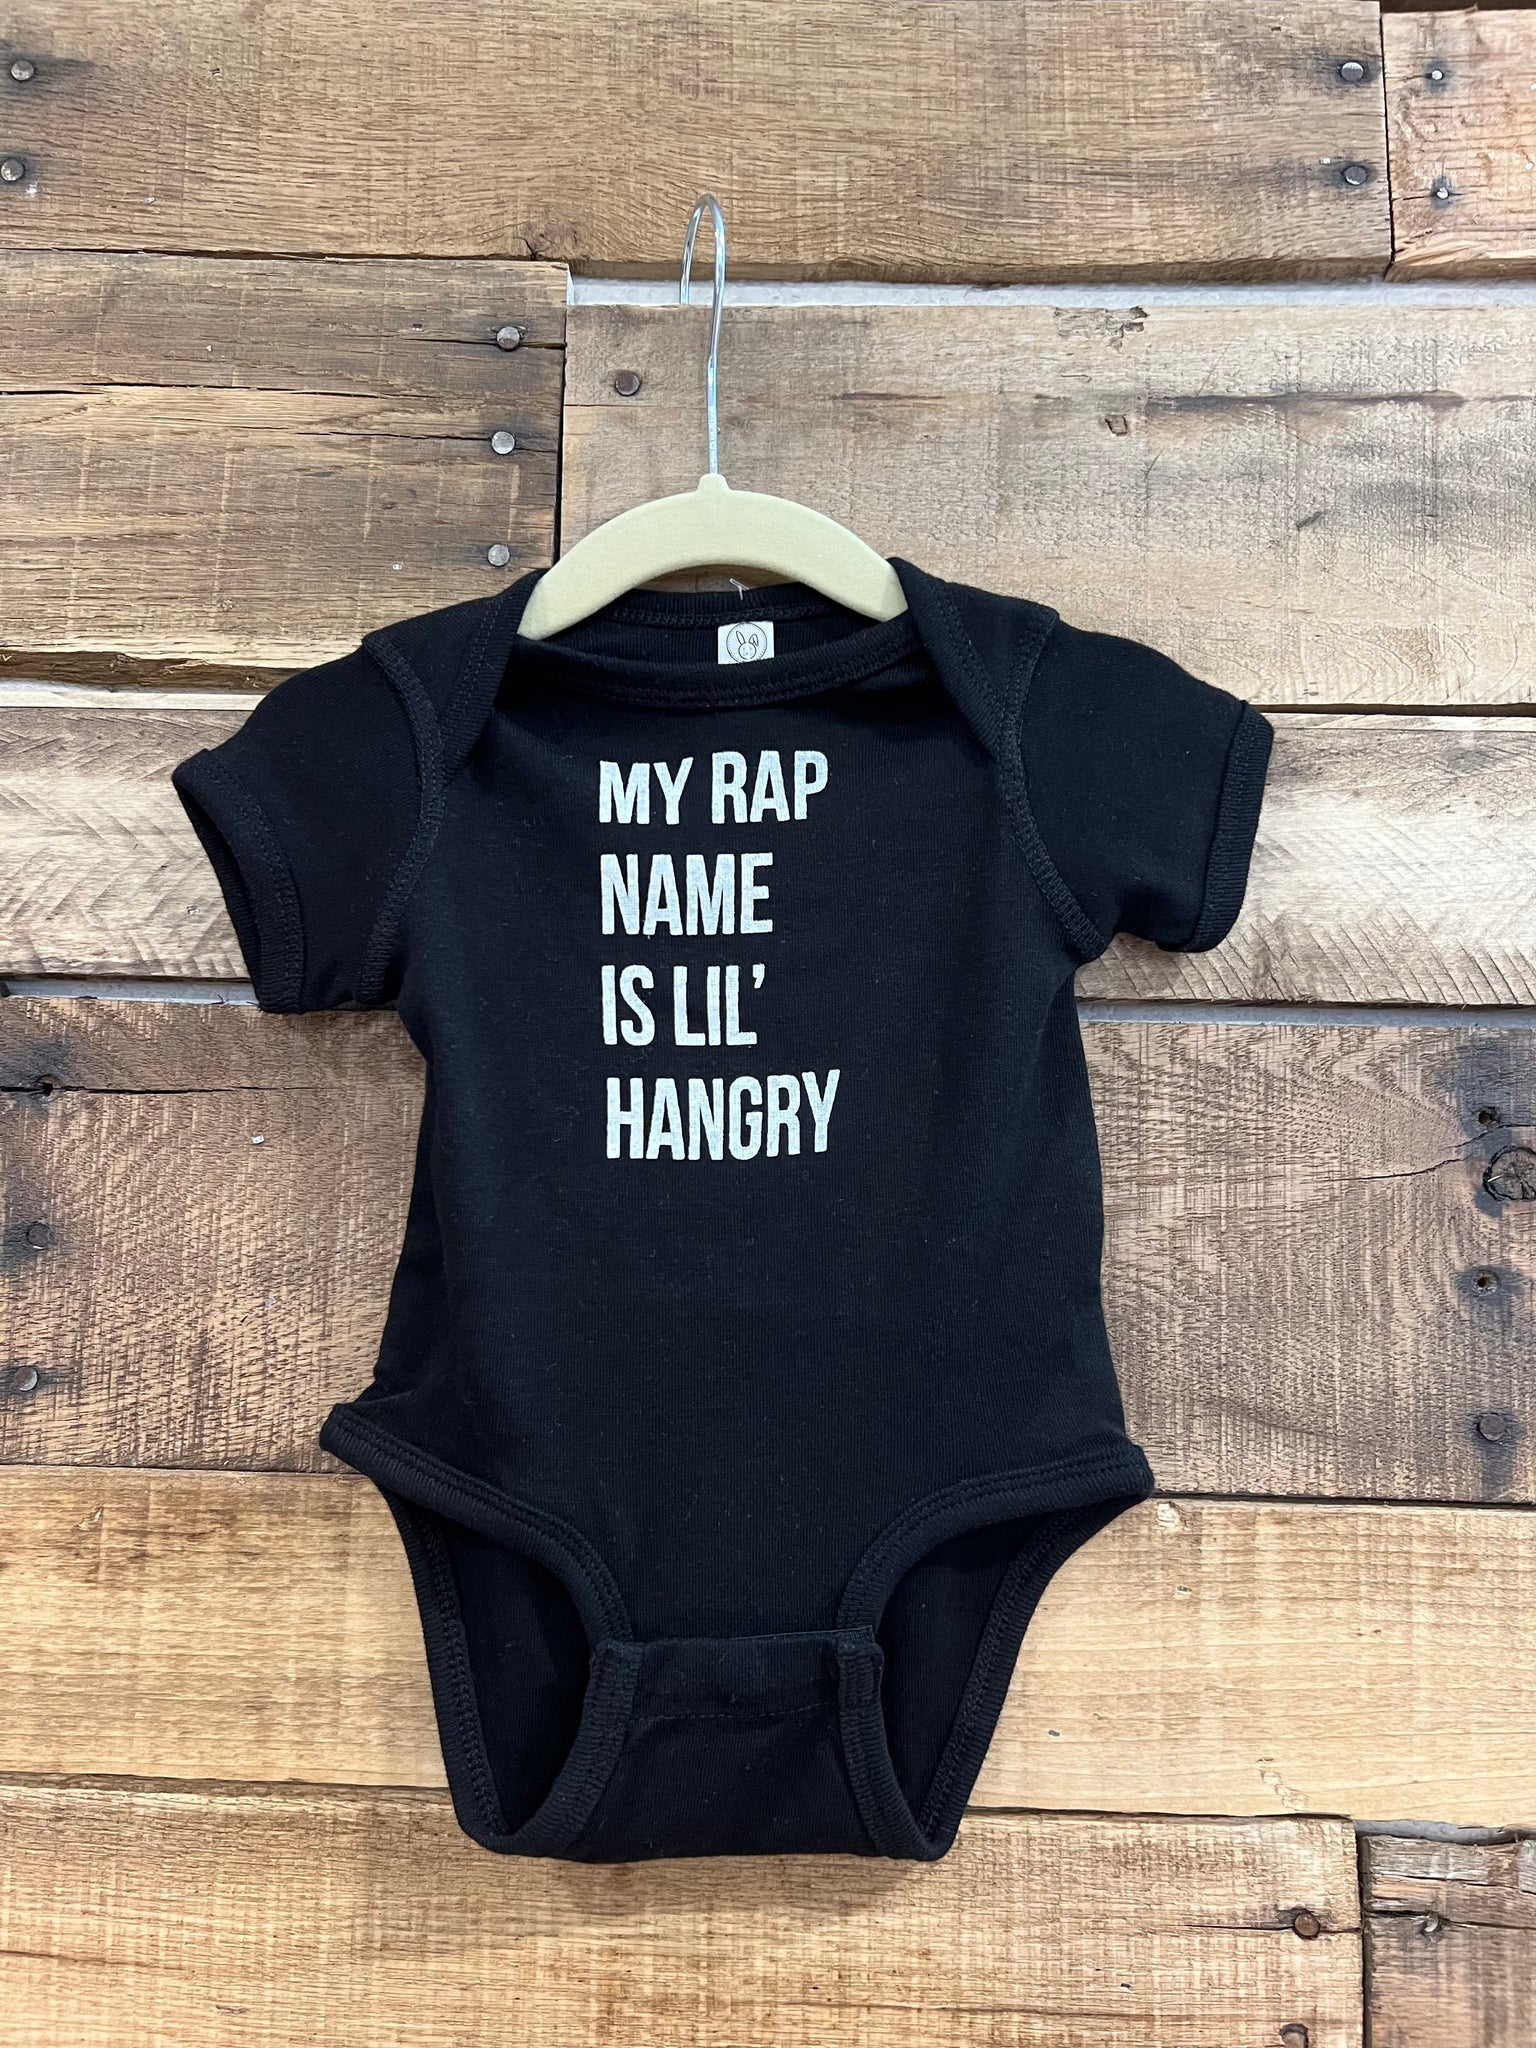 Lil' Hangry Baby Onesie